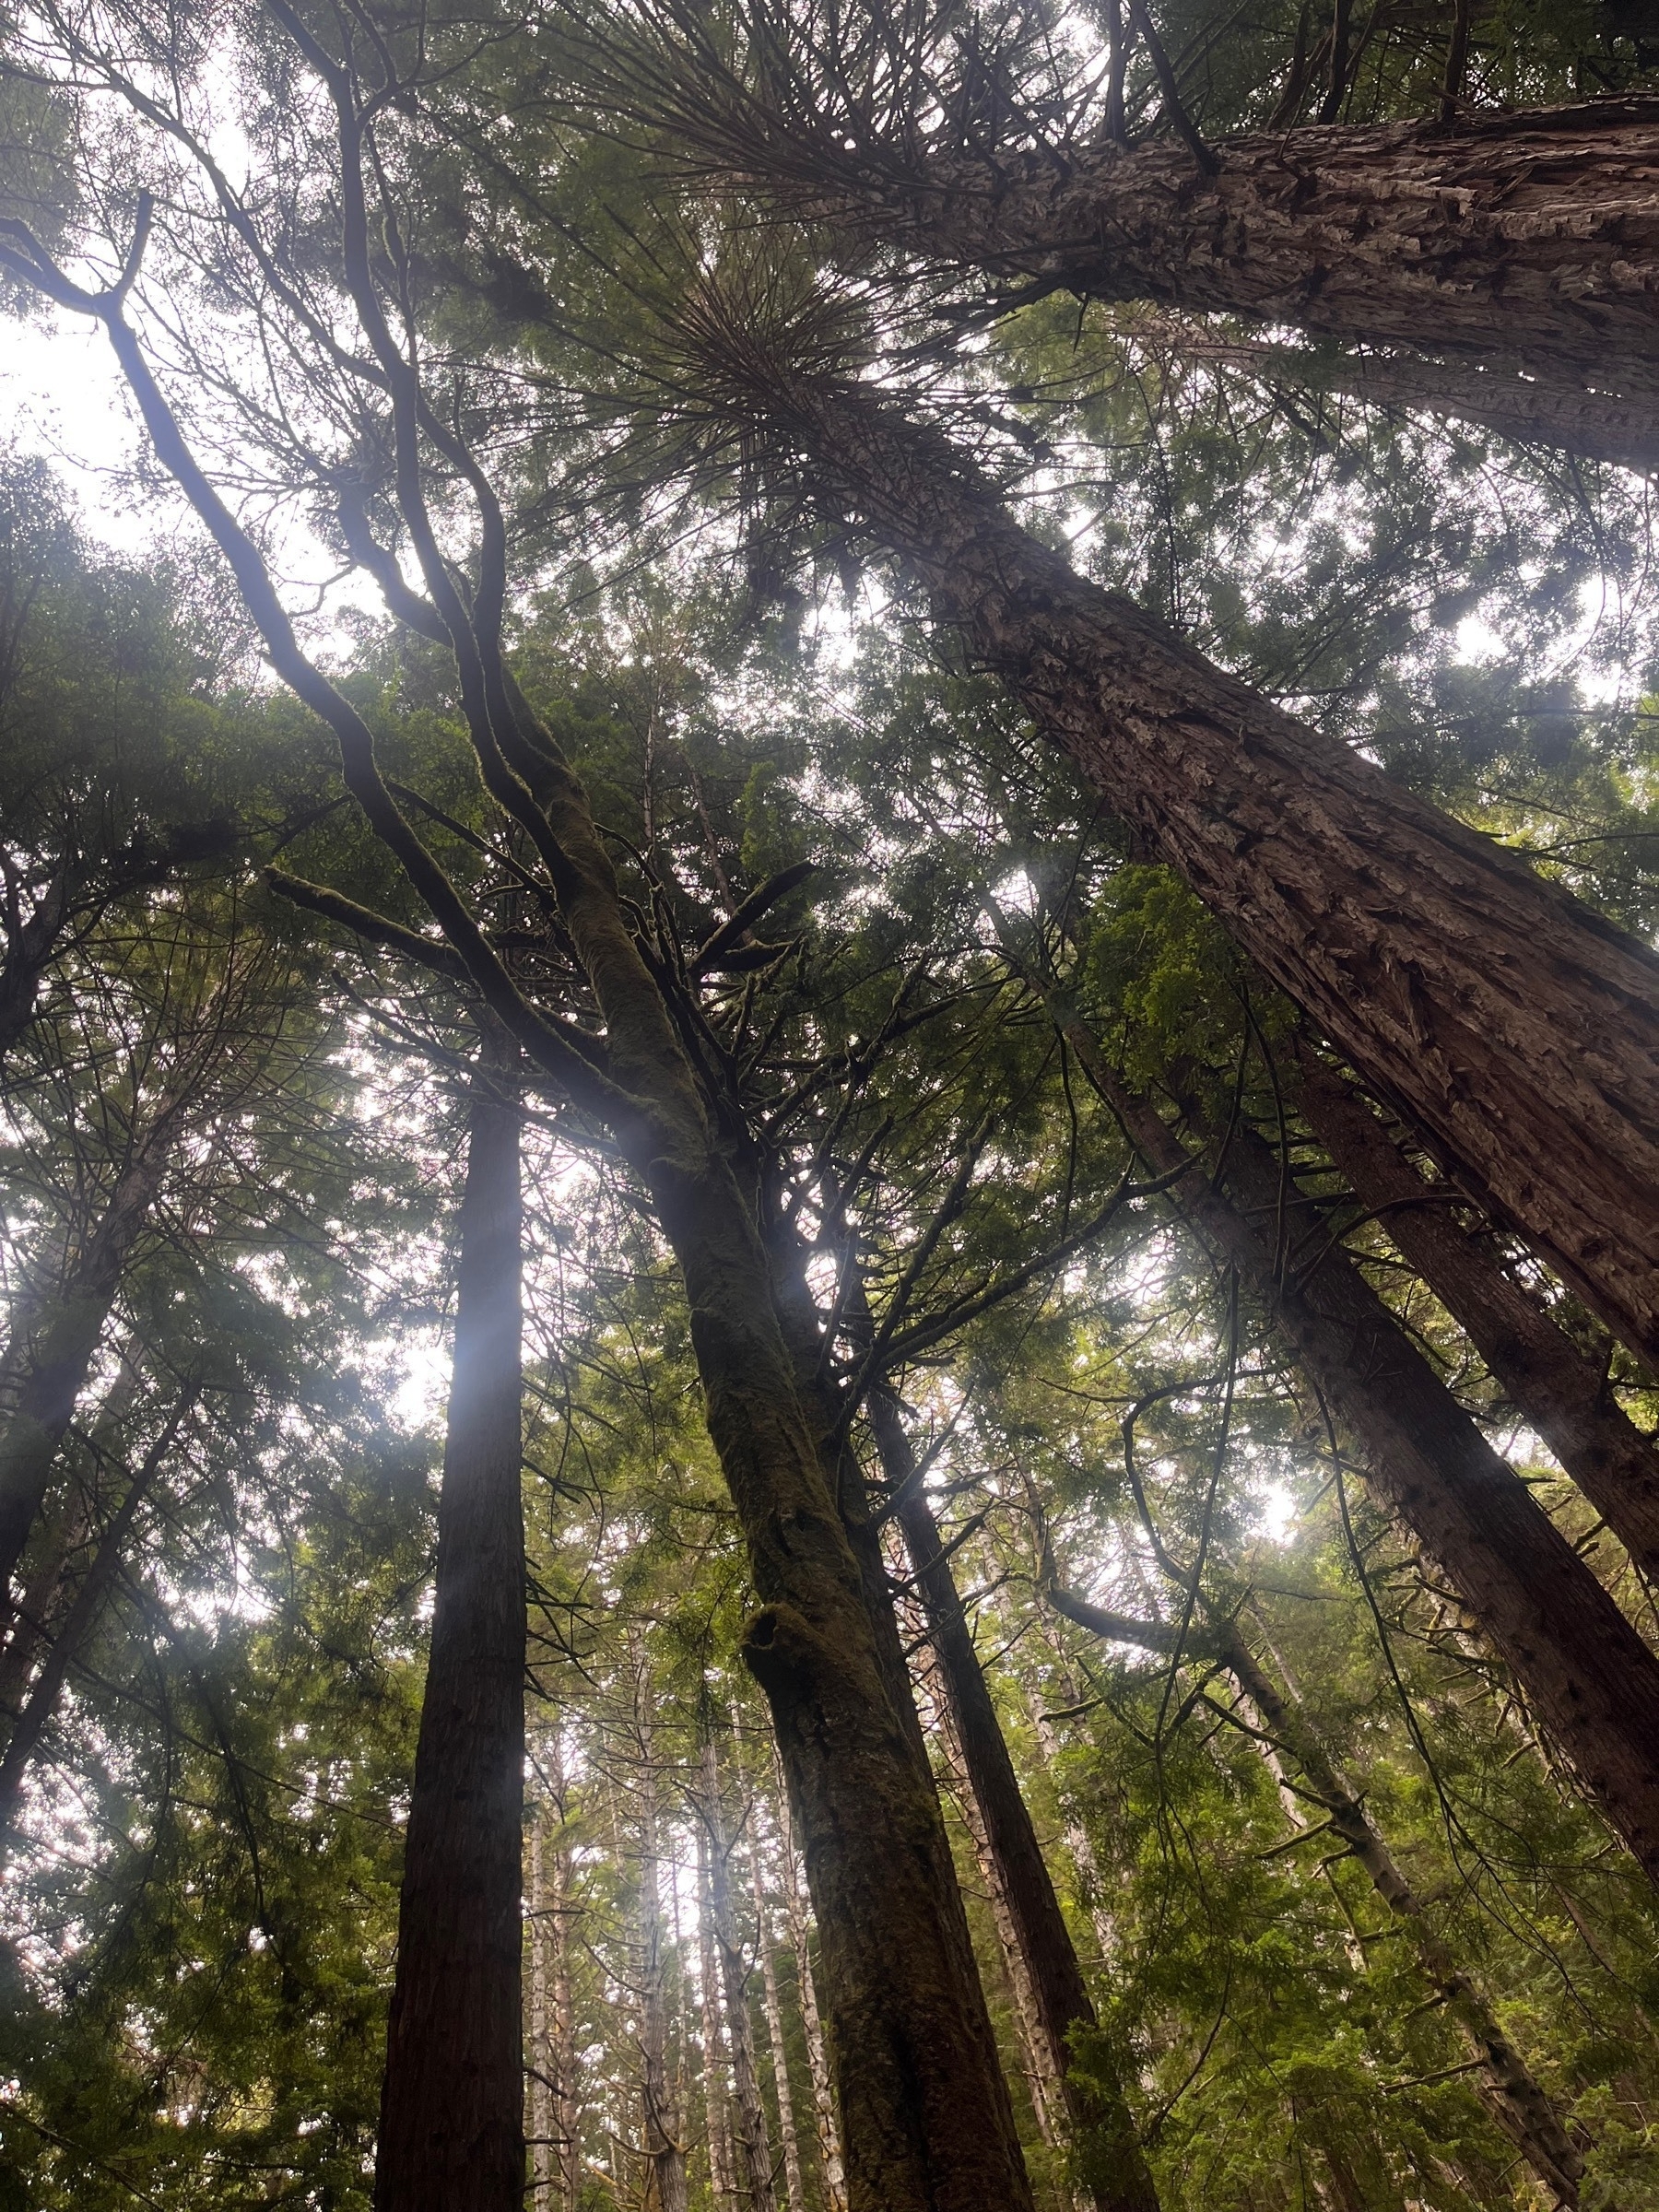 Looking up to the sky in a forest of Red Woods in Northern California